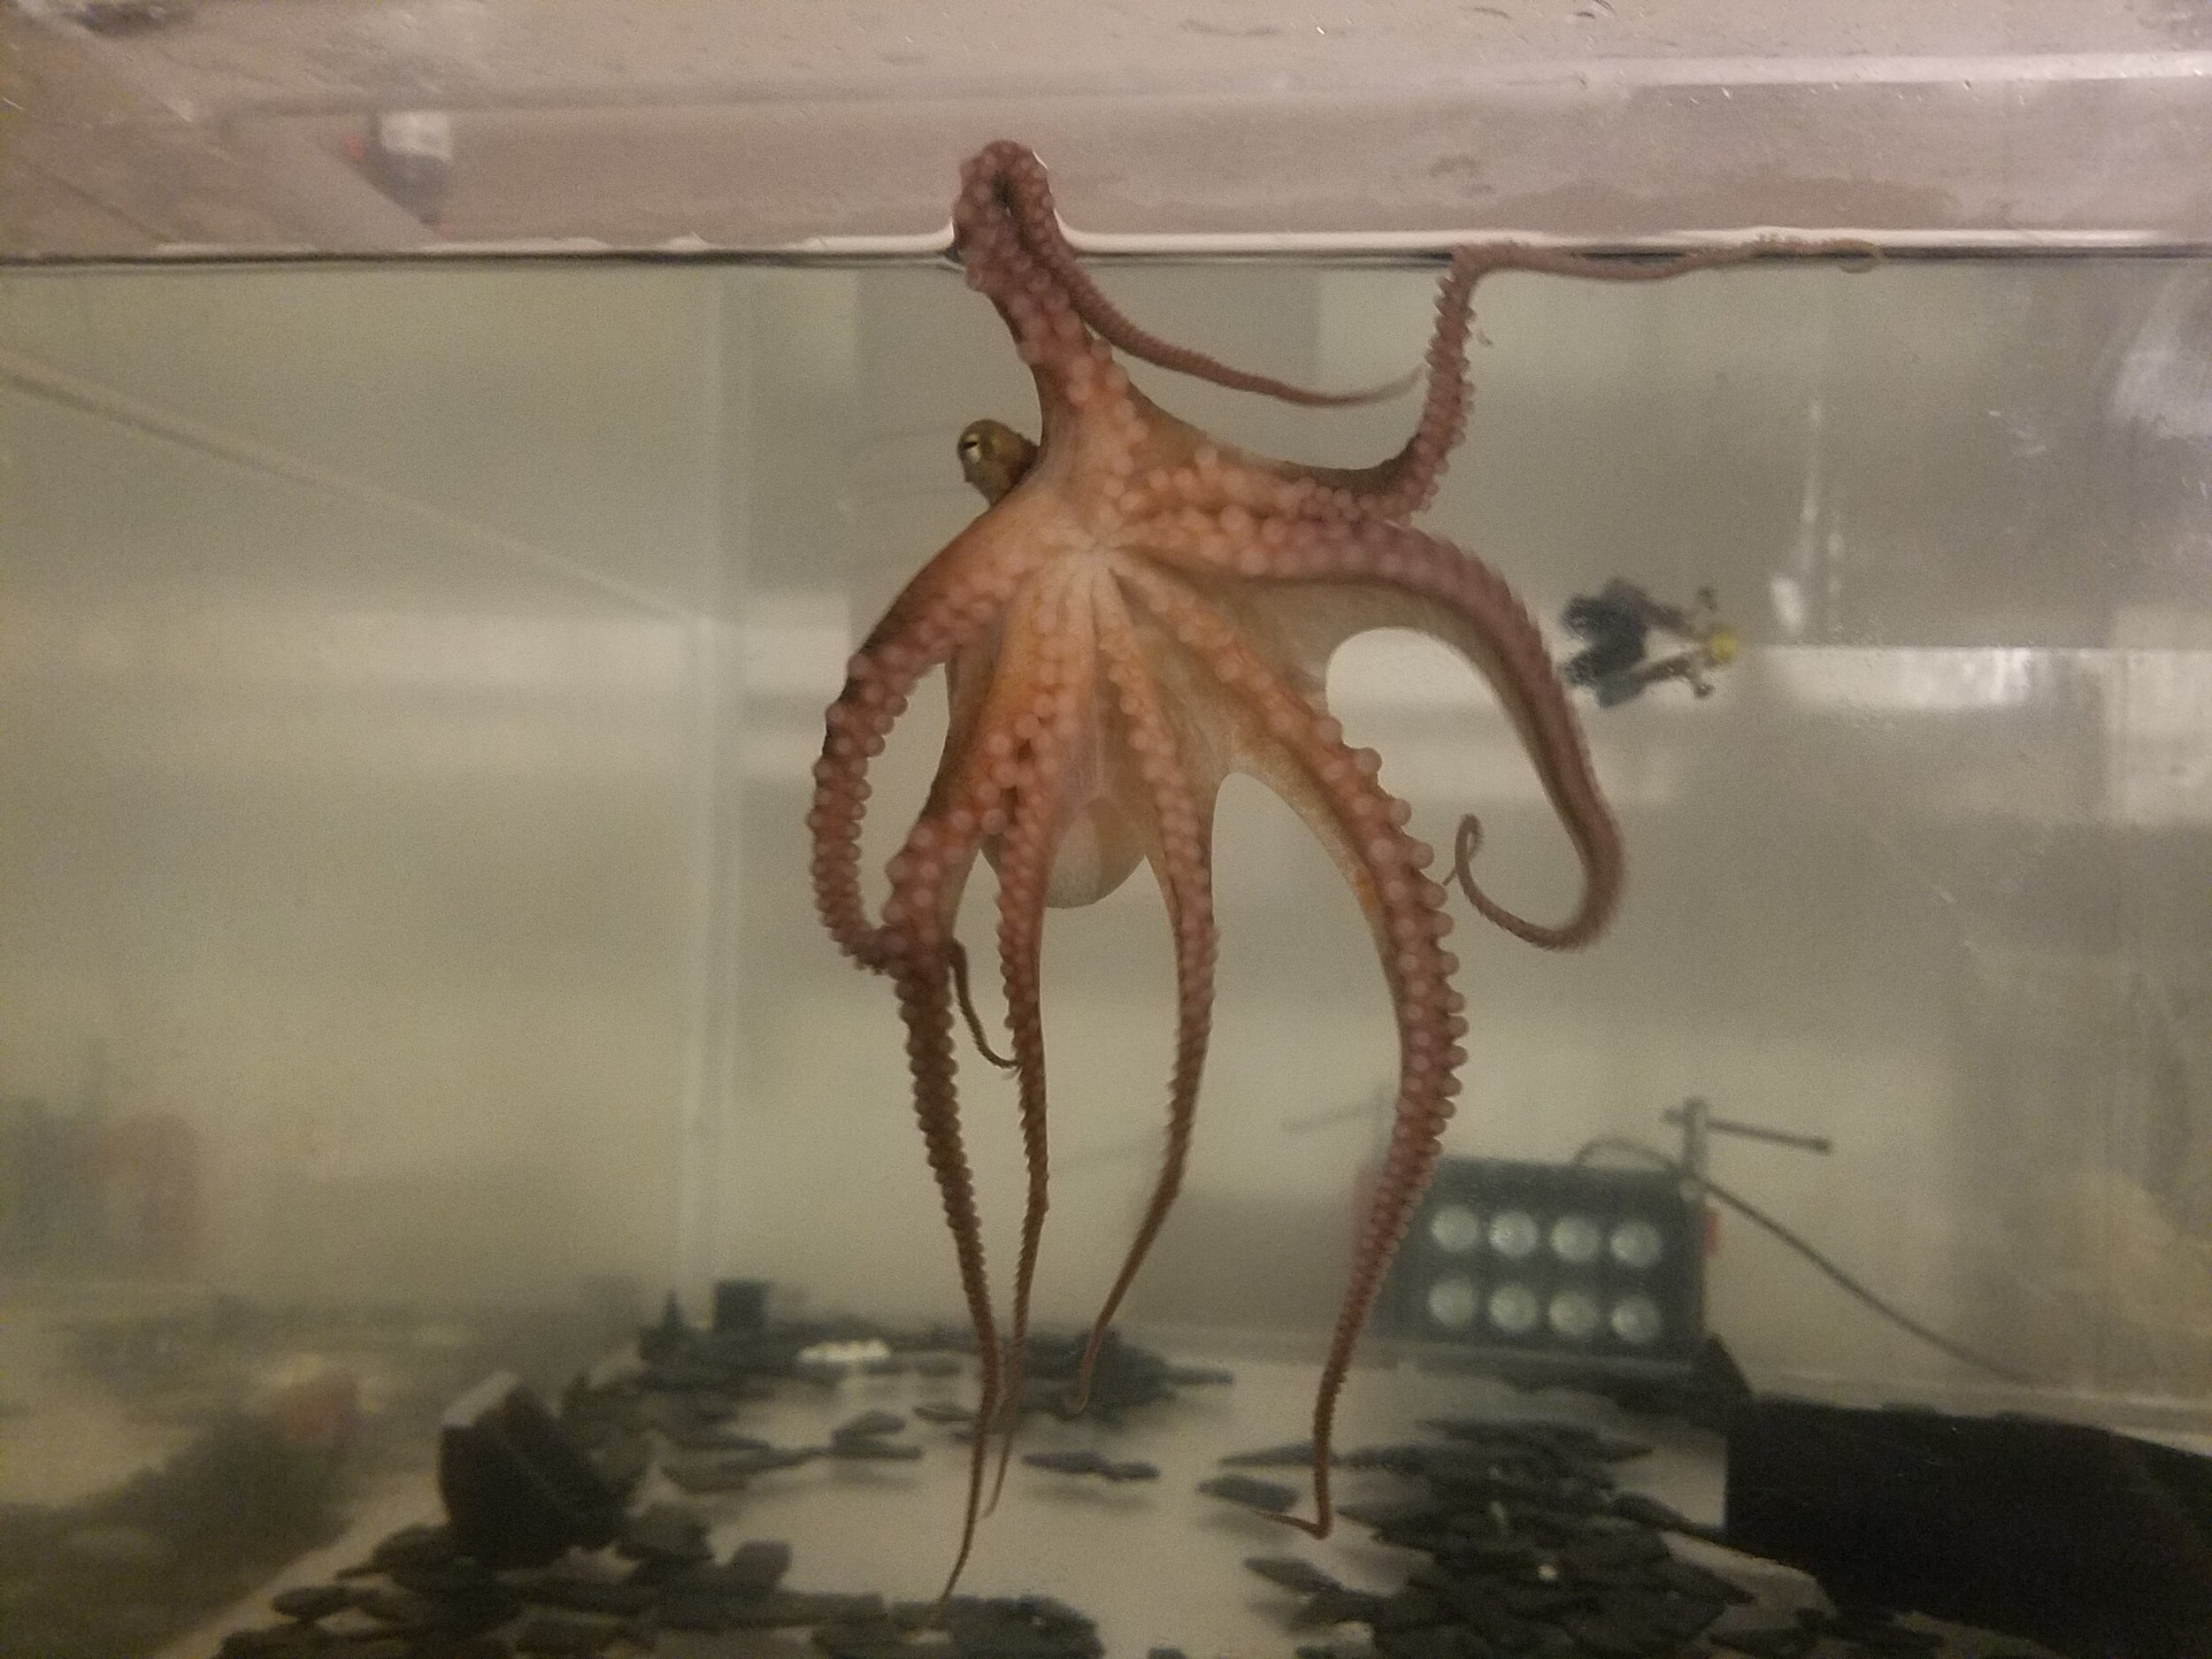  Most of the octopus’ brain exists within its arms. The octopus therefore uses a completely different strategy for sensing, thinking and moving. 